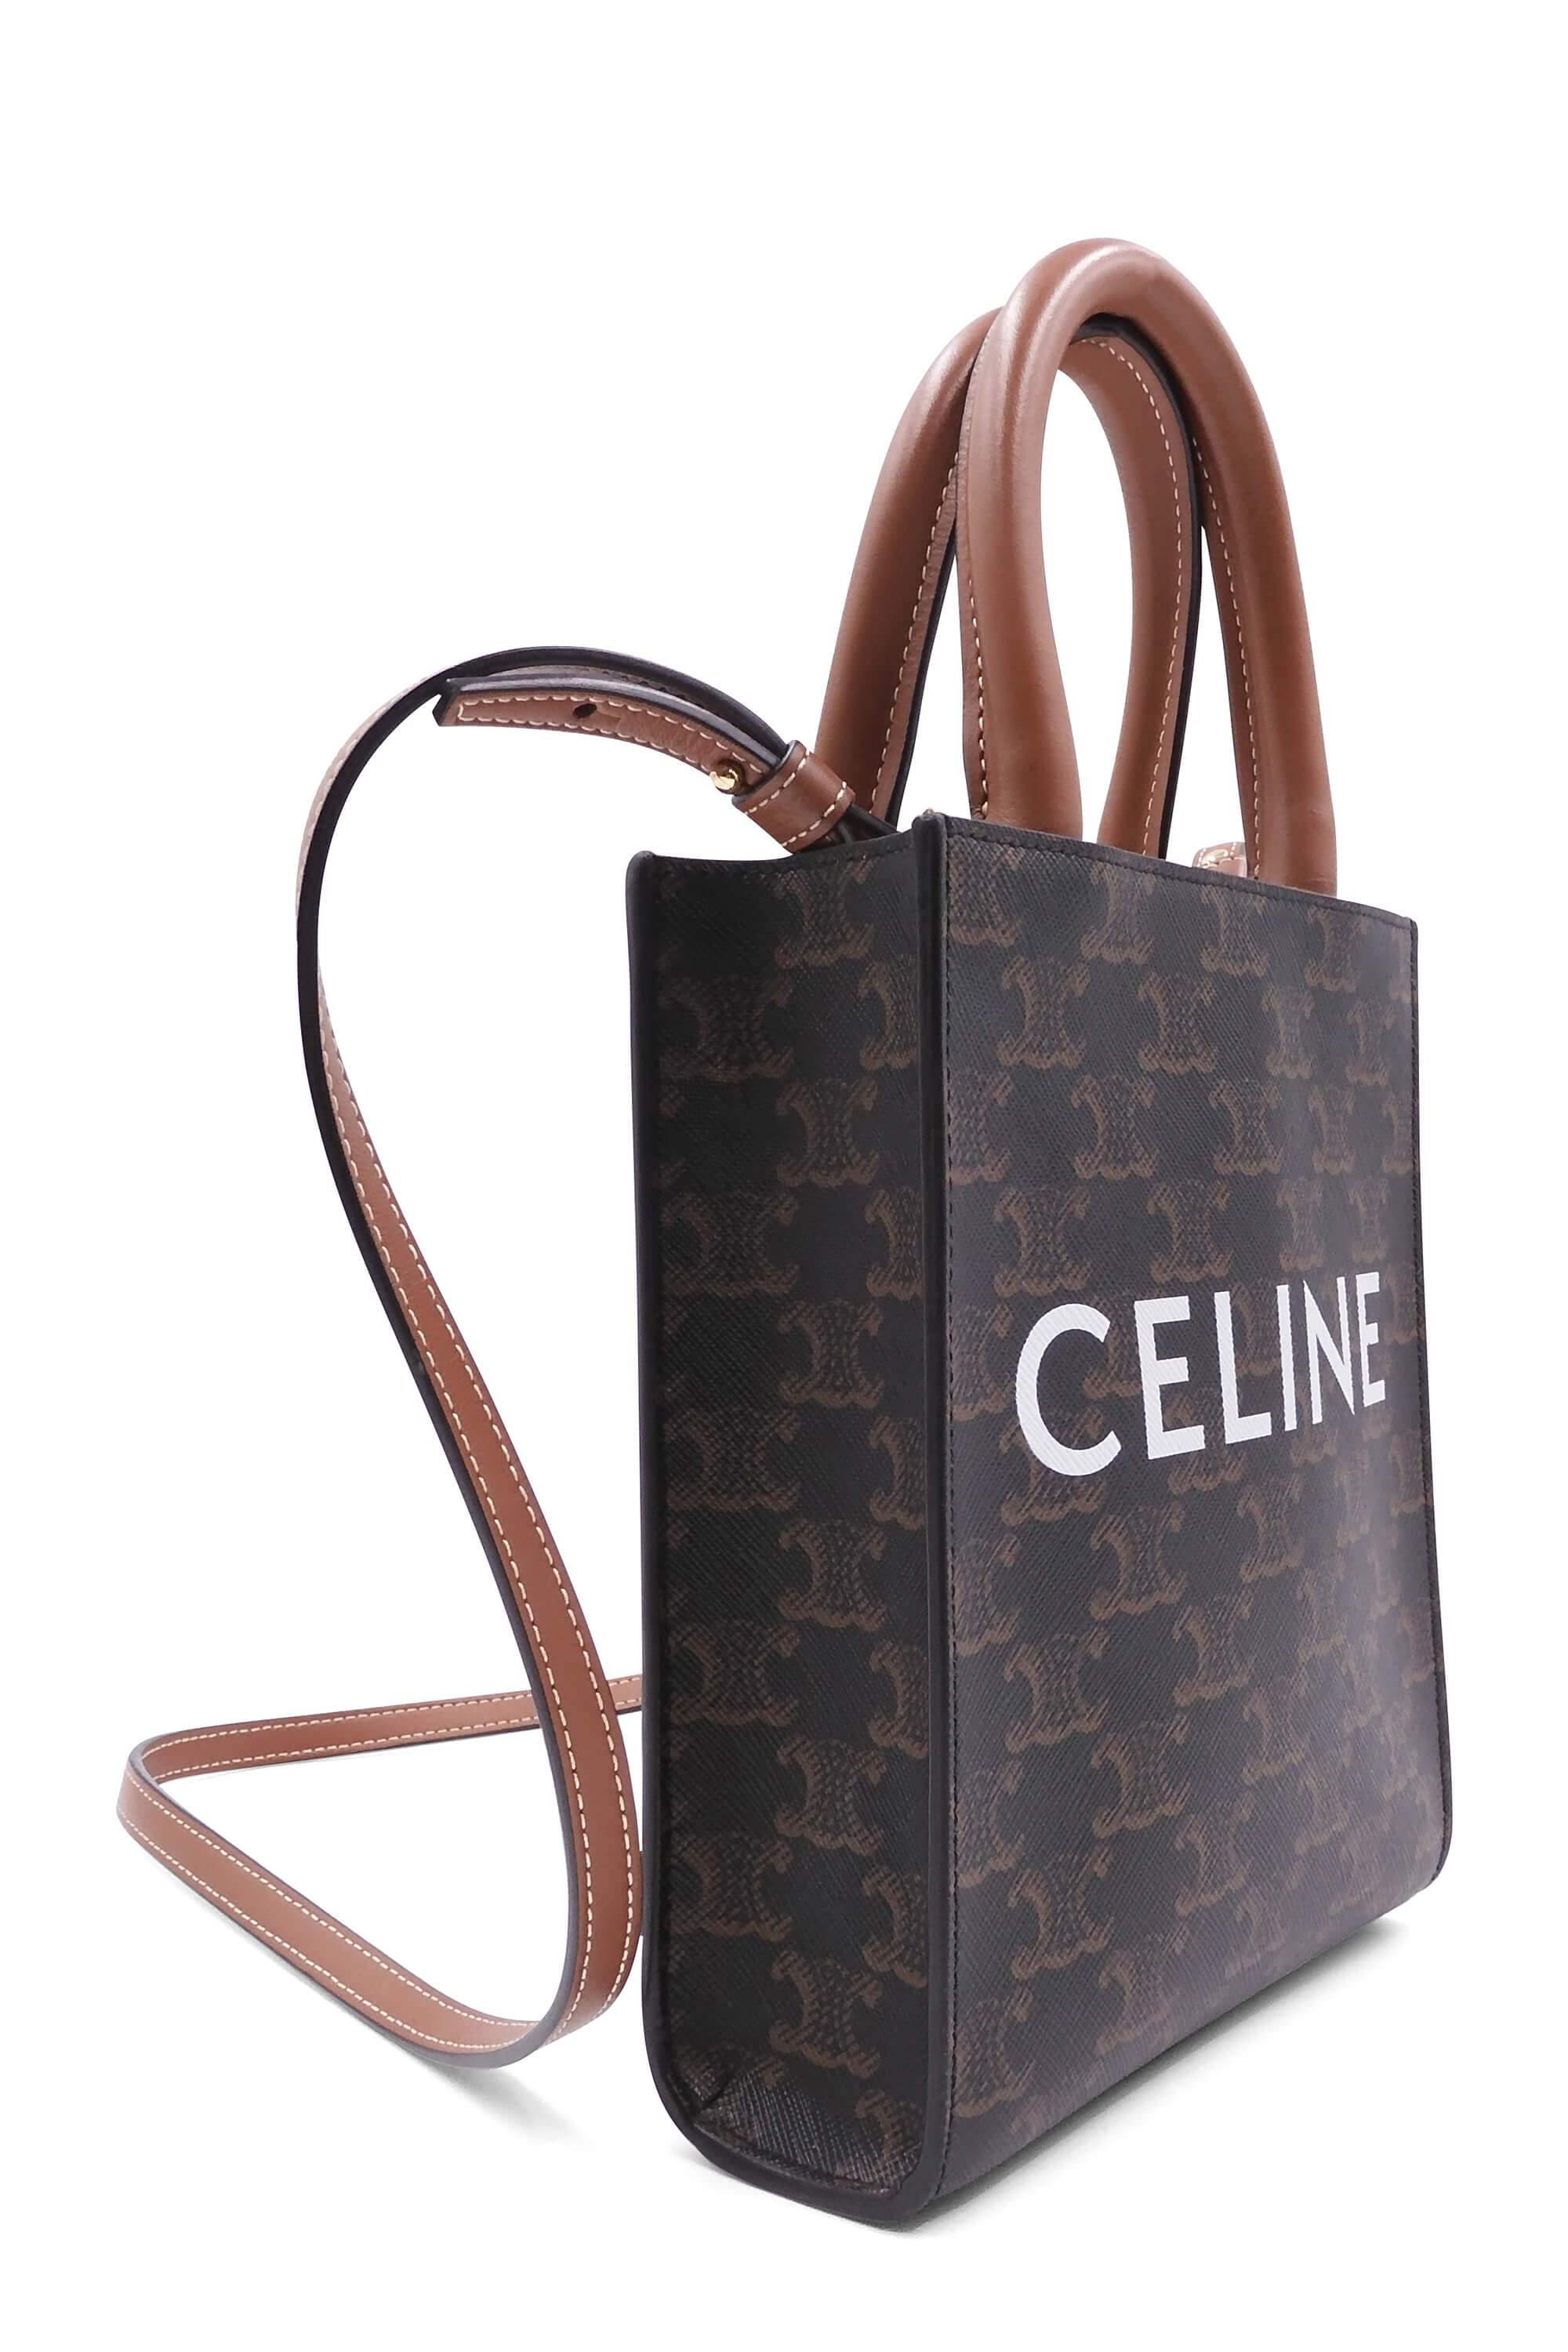 Is the Celine mini vertical cabas bag worth the 💰?, Video published by  cora🤍